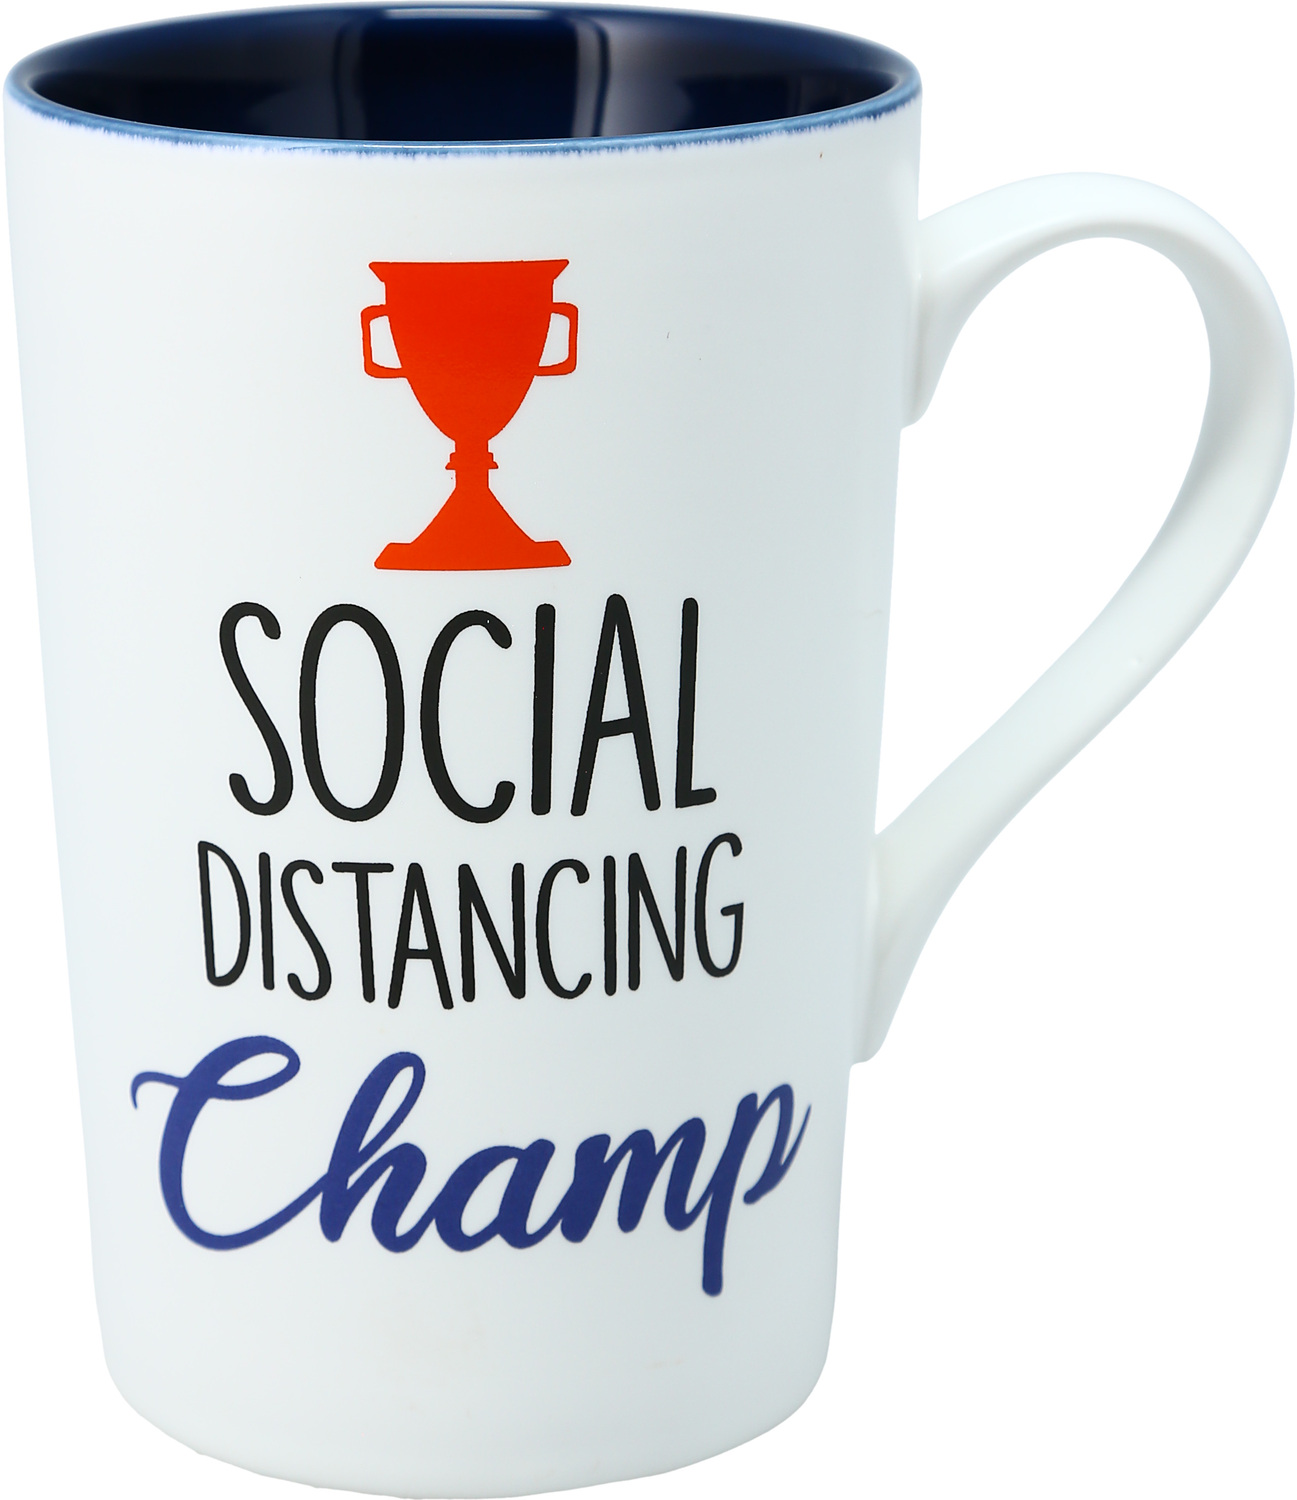 Champ by Essentially Yours - Champ - 15 oz Latte Cup